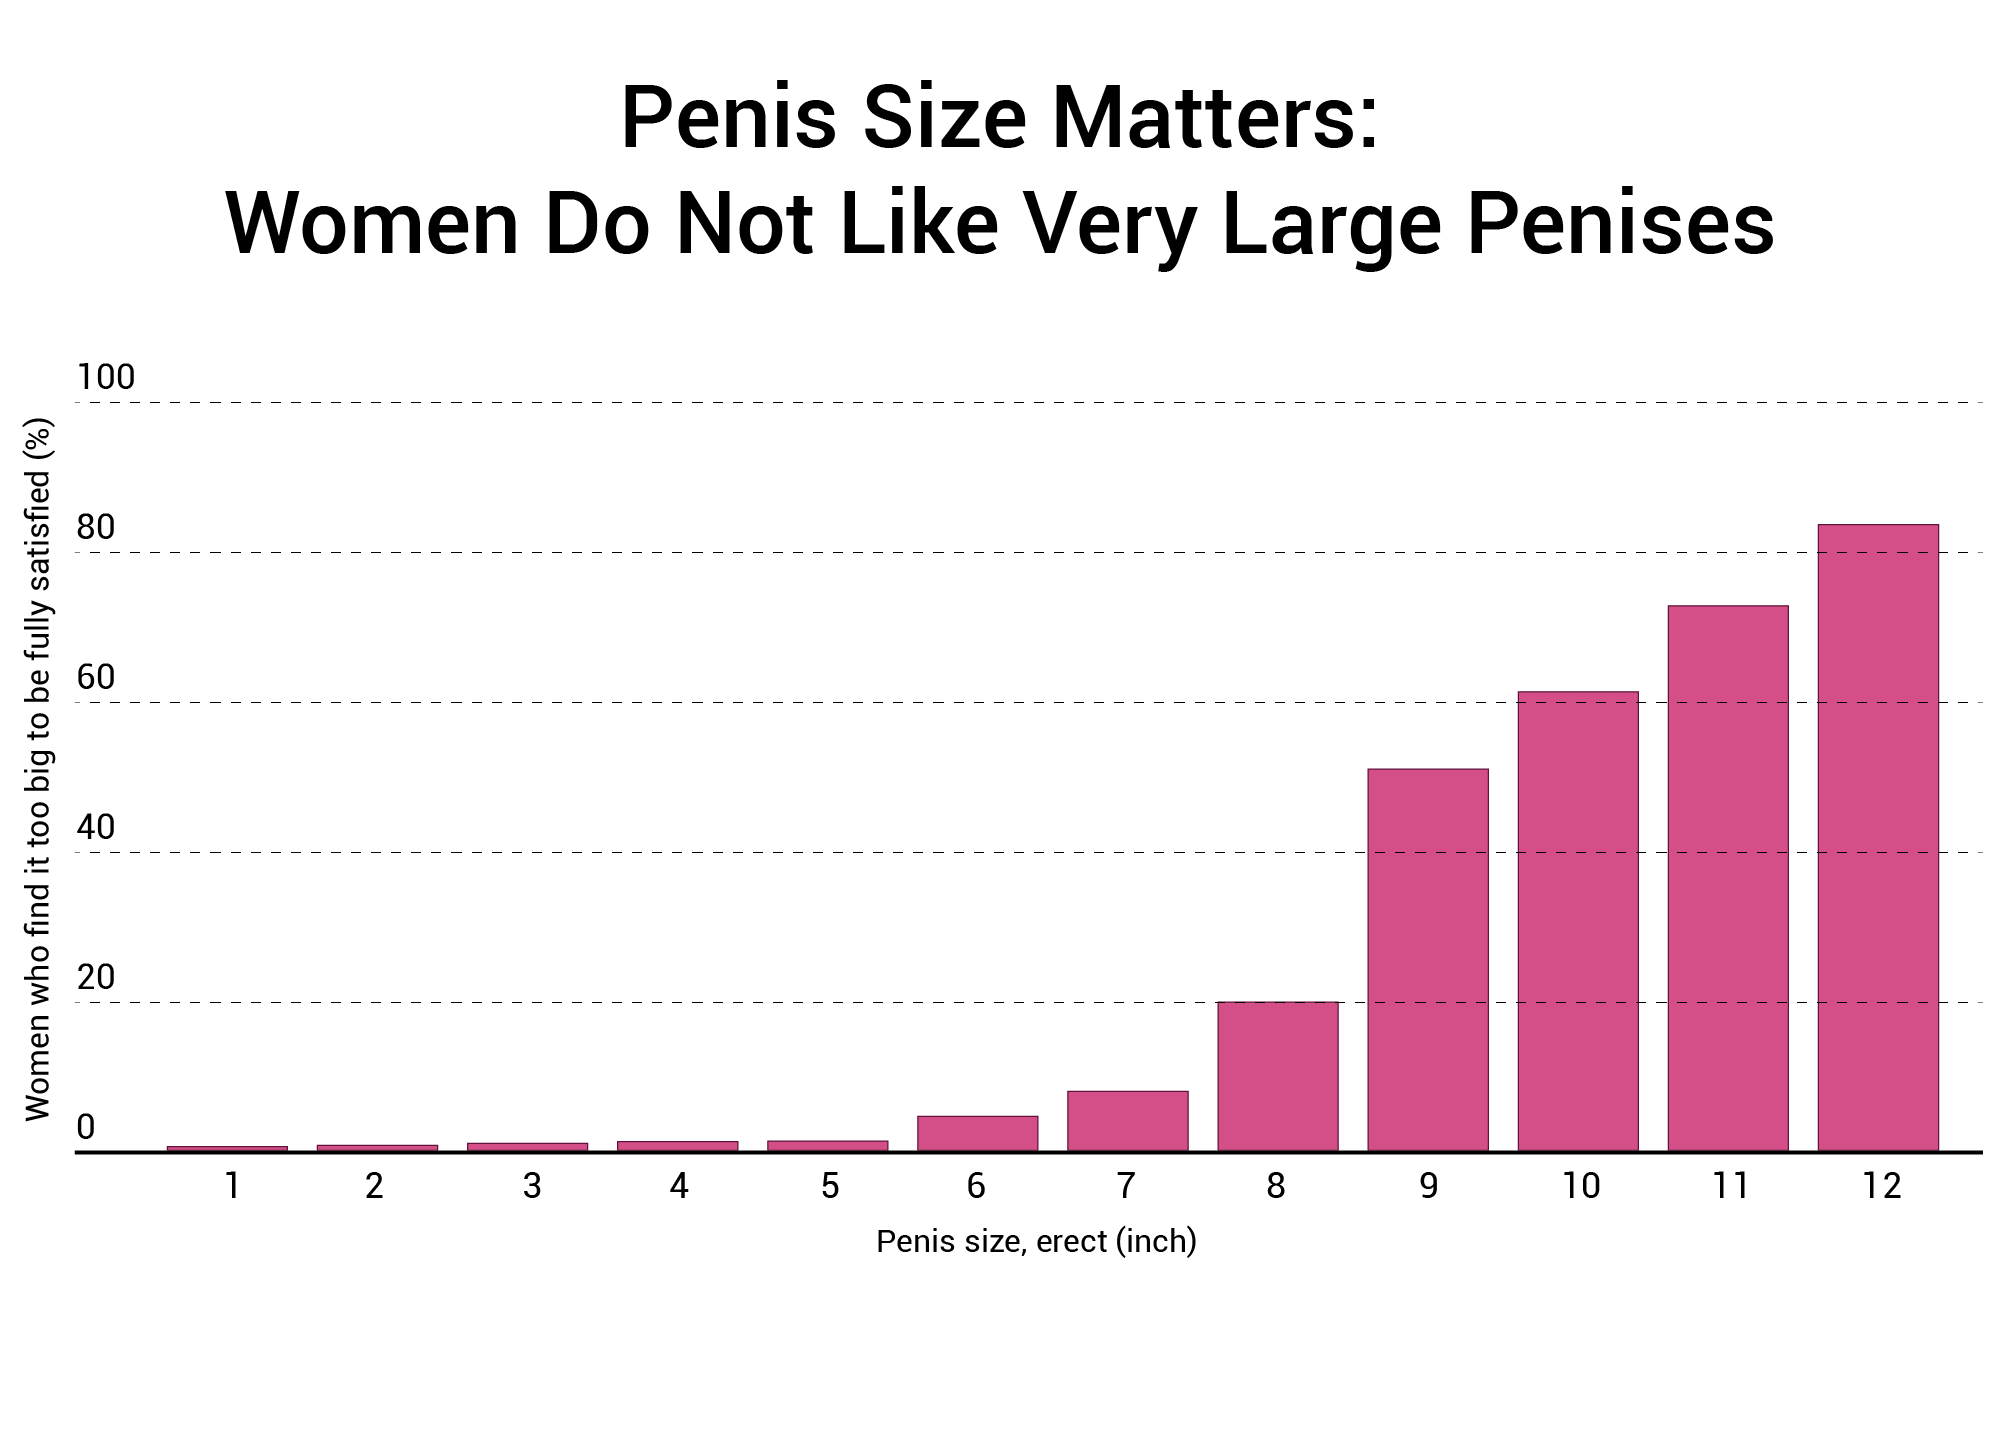 Does Size Matter? 91.7% Of Women Say It Does 1,387 Woman Study image